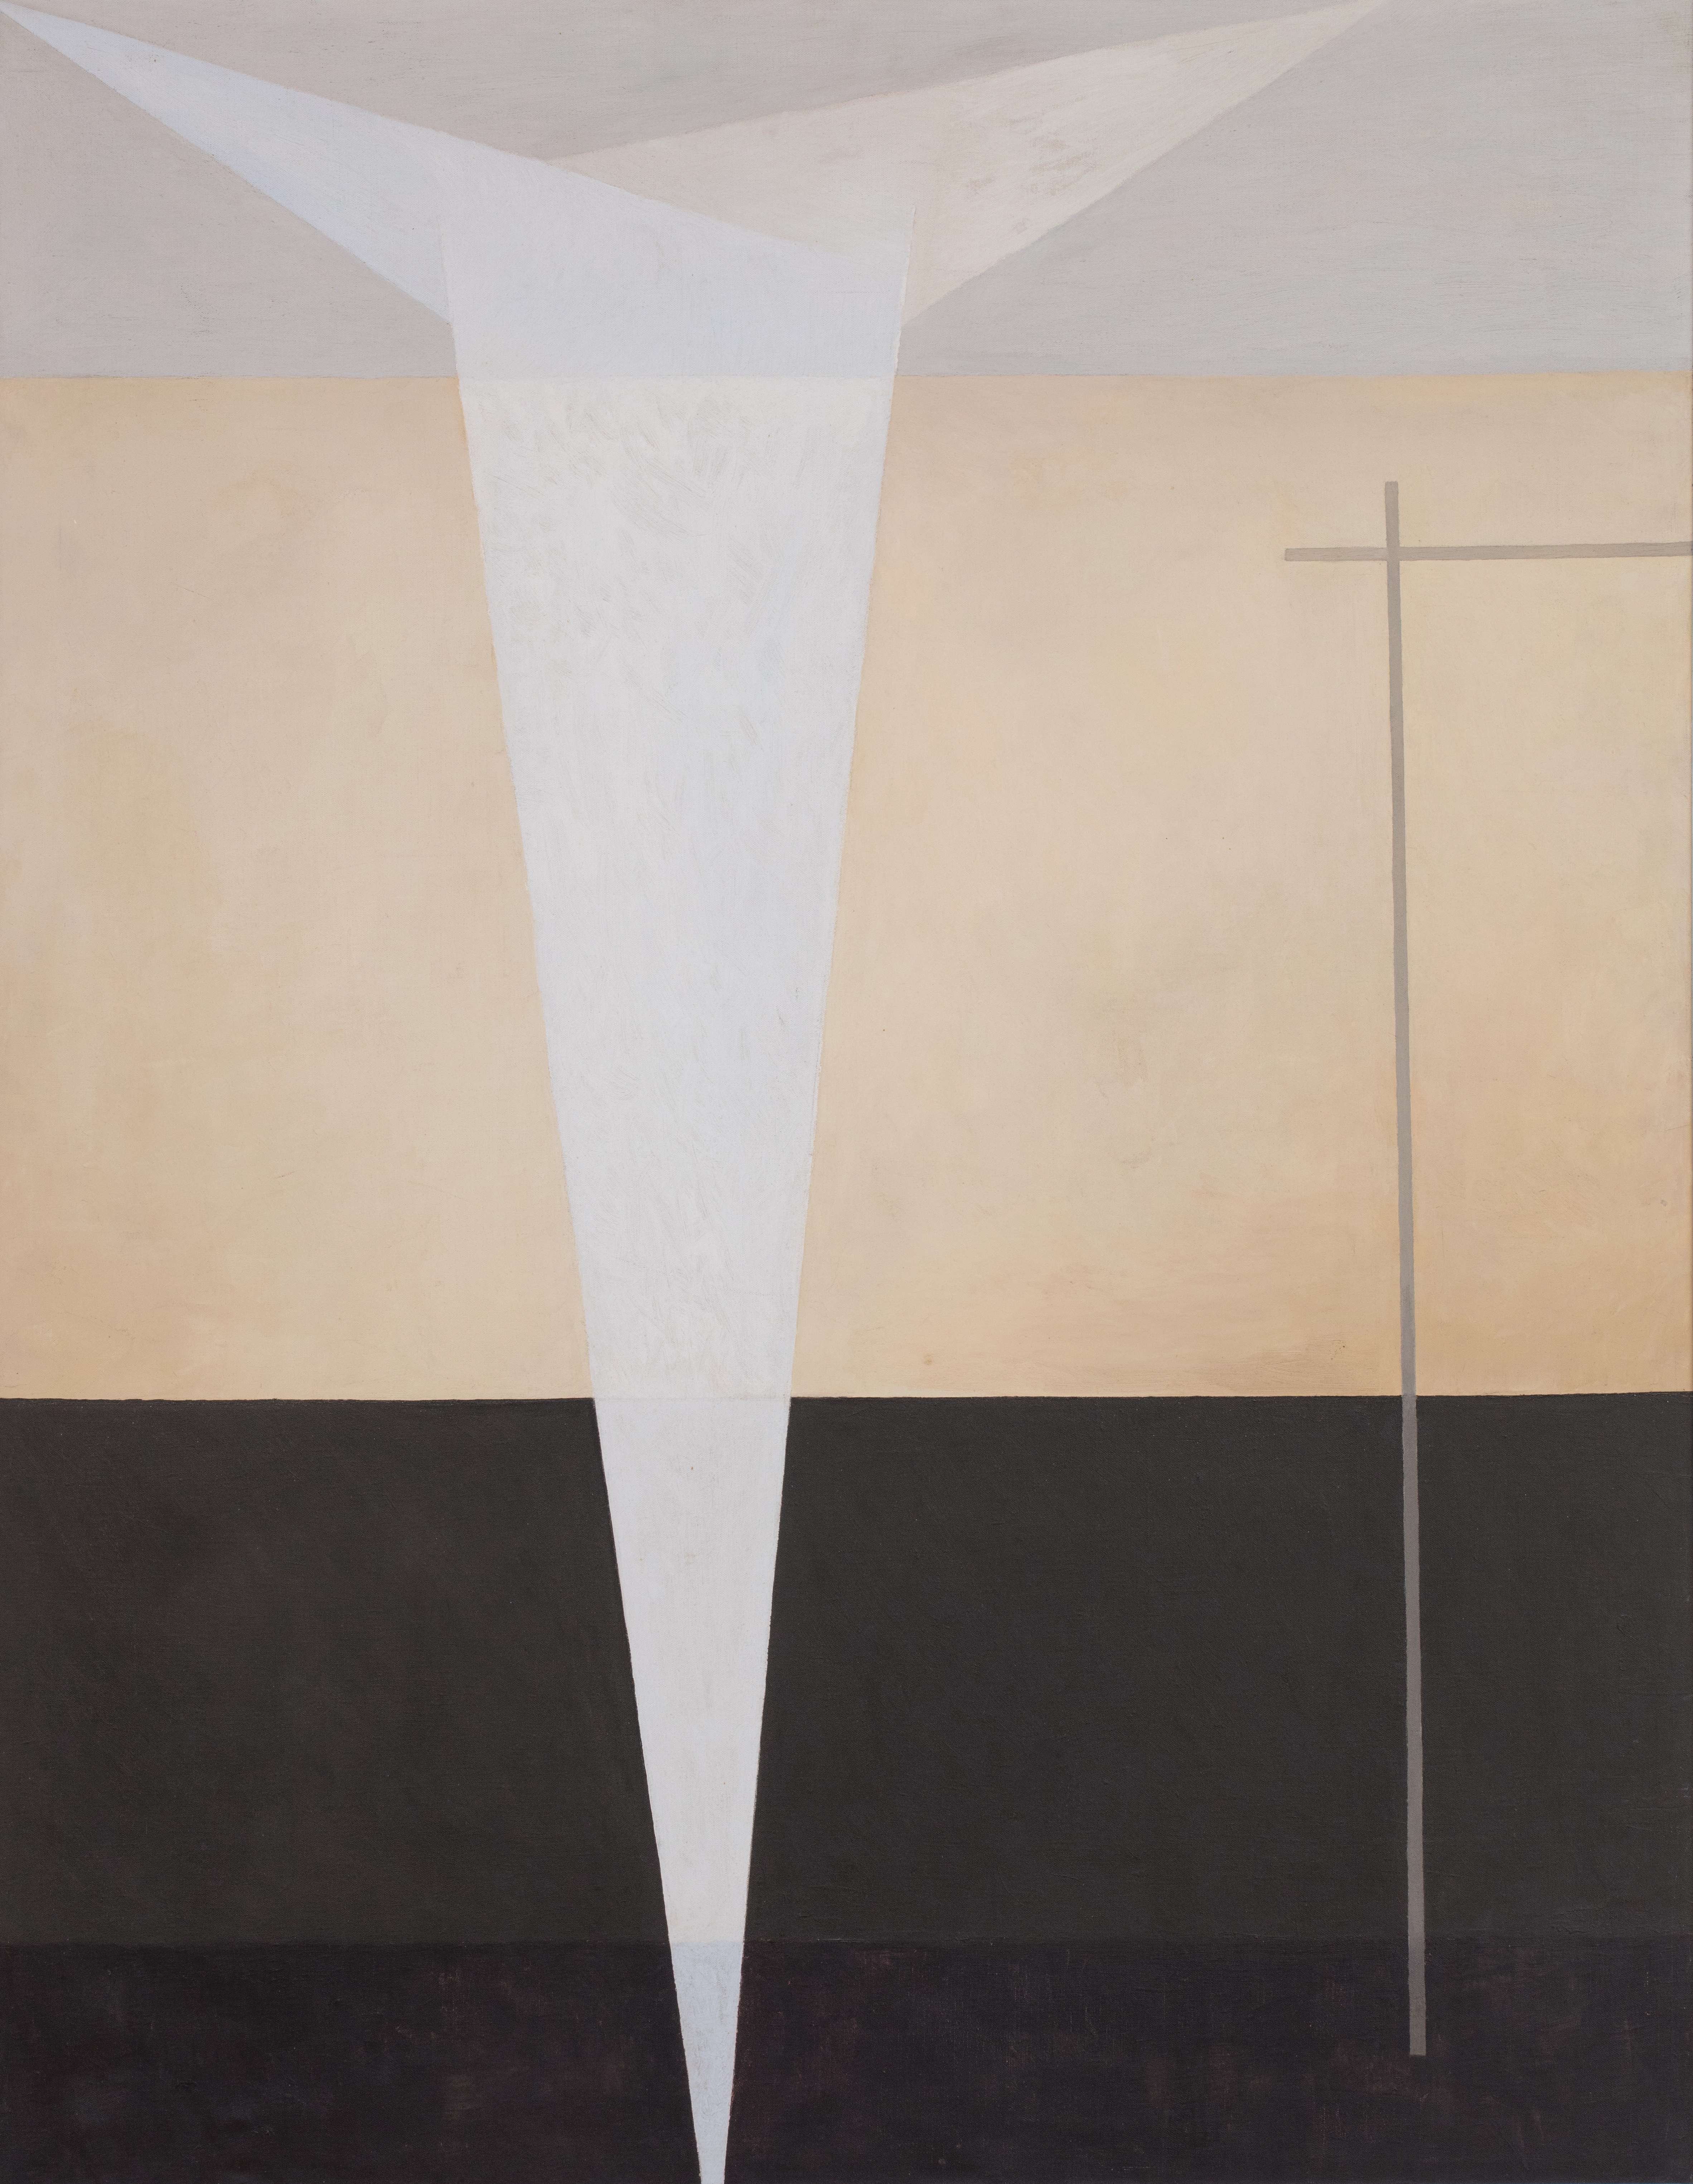 Abstract oil on canvas painting; the background is three horizontal thick stripes of grey, beige, and black. In the foreground is a form made of three white triangles, which make a "T" shape, as well as two thin lines which intersect to make a smaller "t" shape on the right.